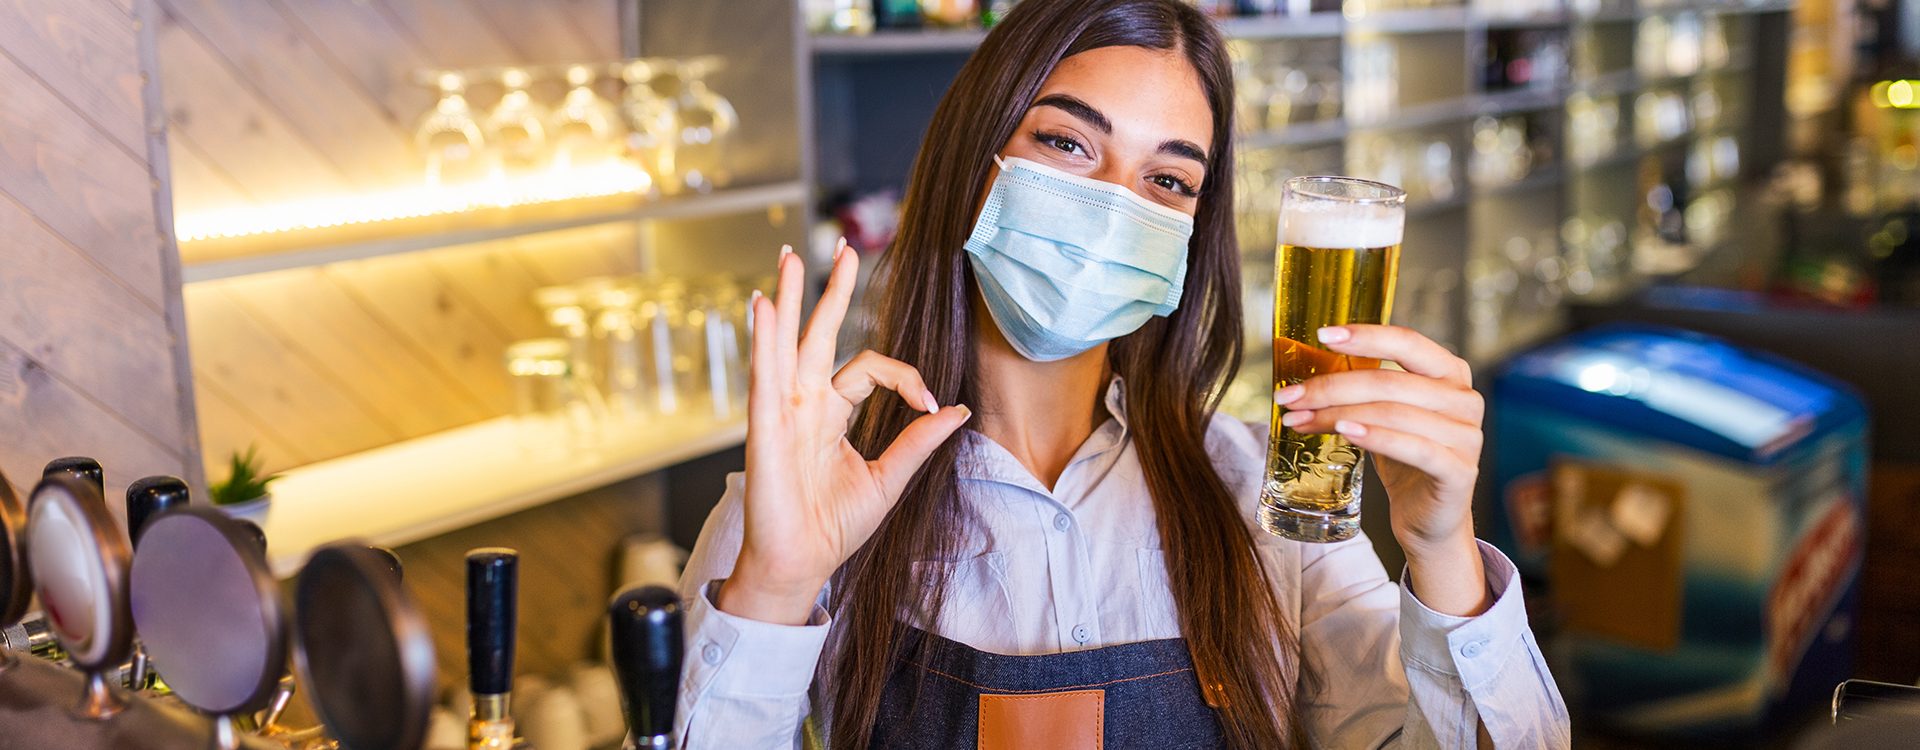 Bartender with protective face mask,covid-19 protection, serving a draft beer at the bar counter during coronavirus pandemic, showing OK sign,shelves full of bottles with alcohol on the background